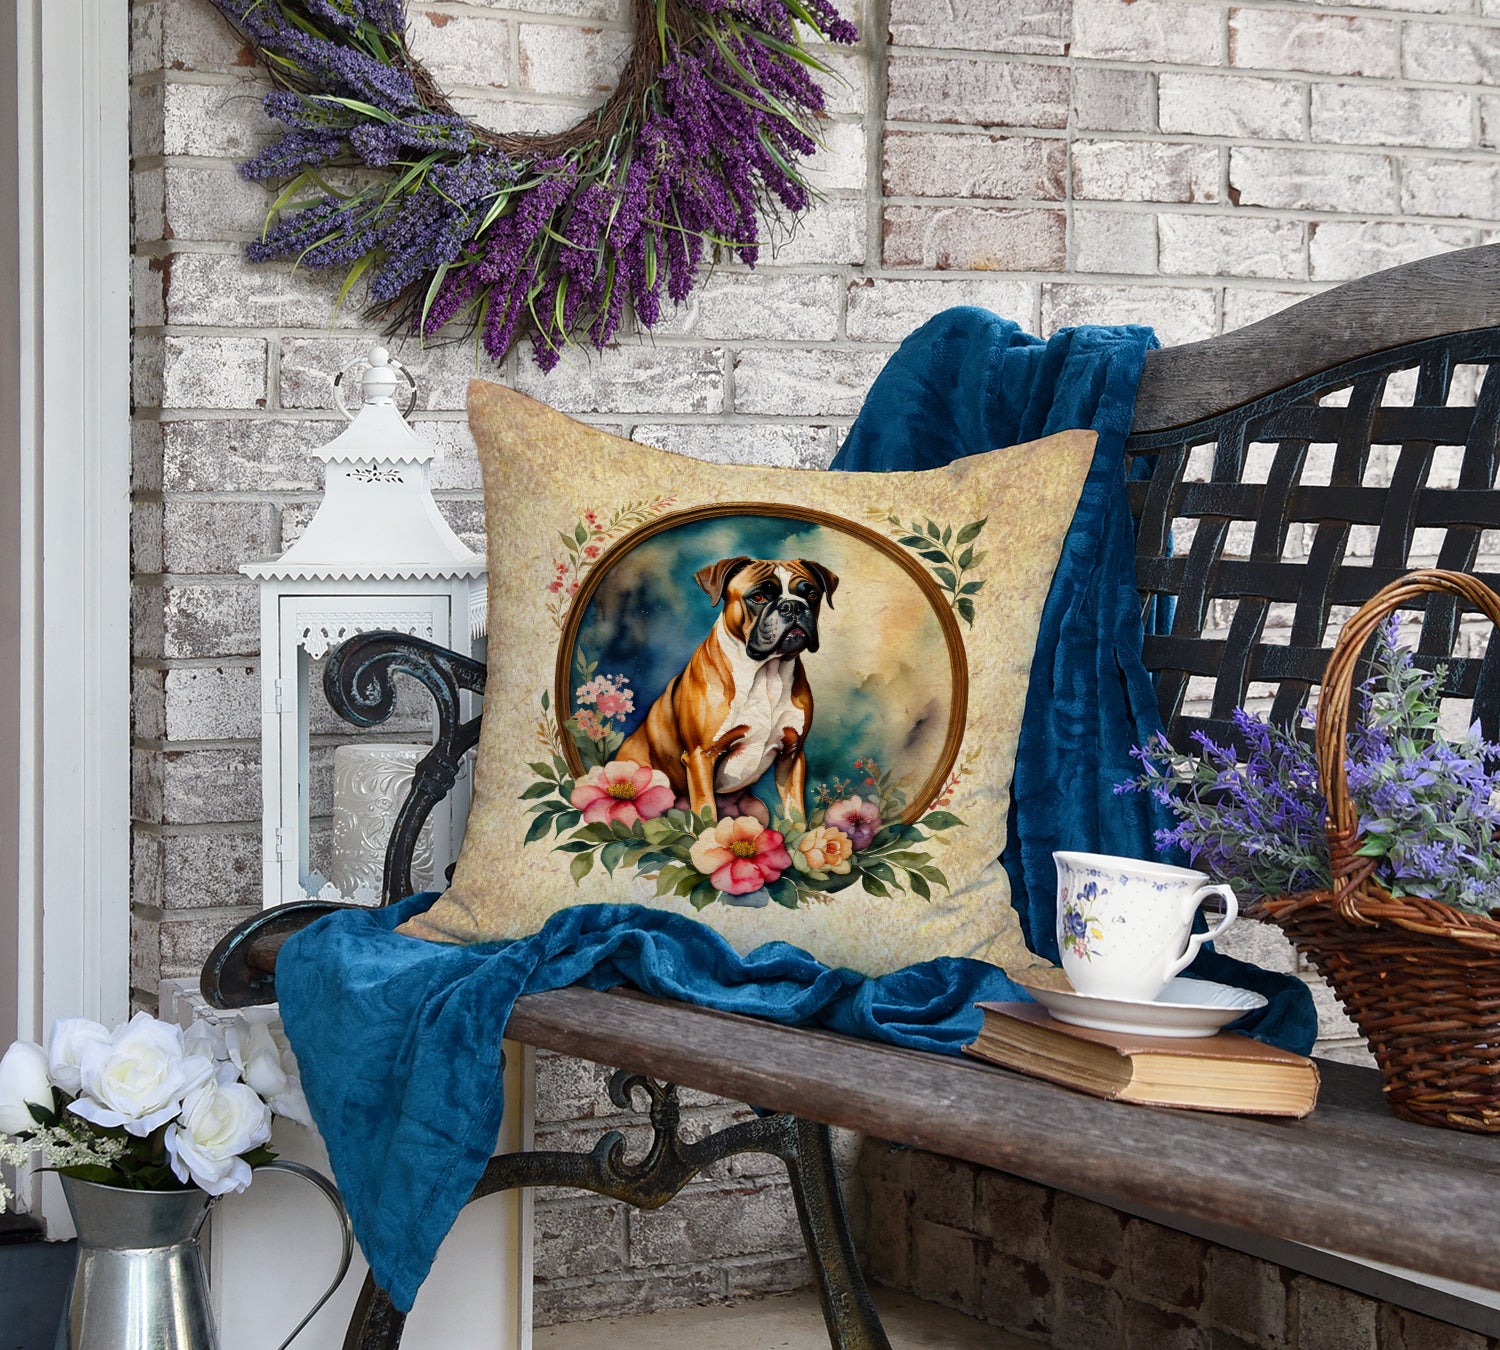 Boxer and Flowers Fabric Decorative Pillow